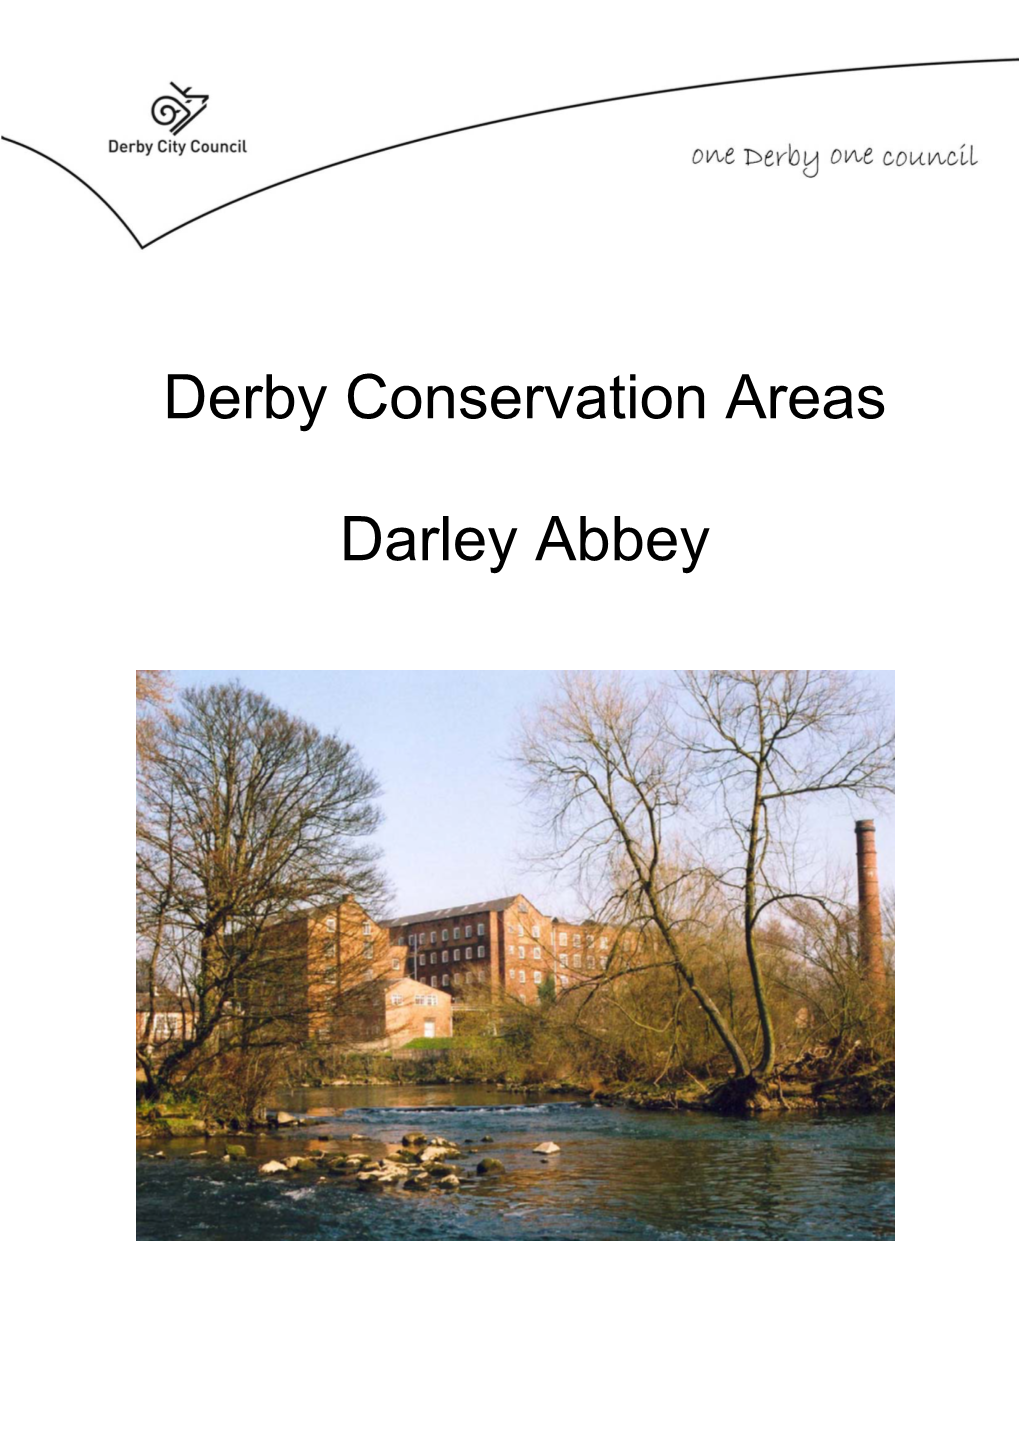 Darley Abbey Conservation Area